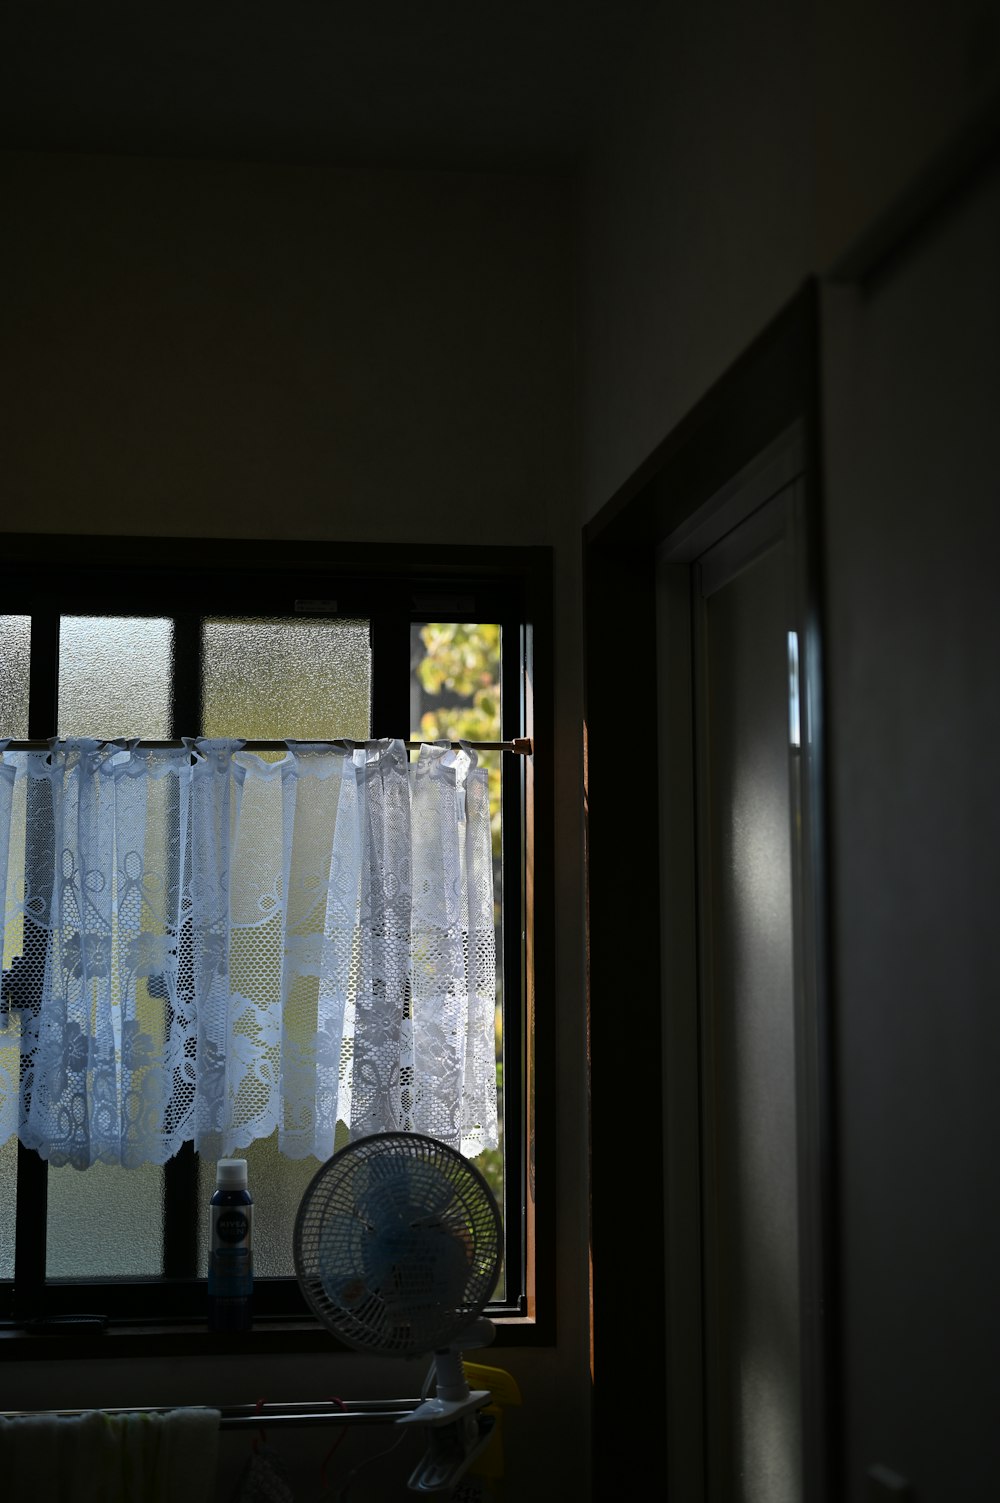 a fan sitting in front of a window next to a window curtain